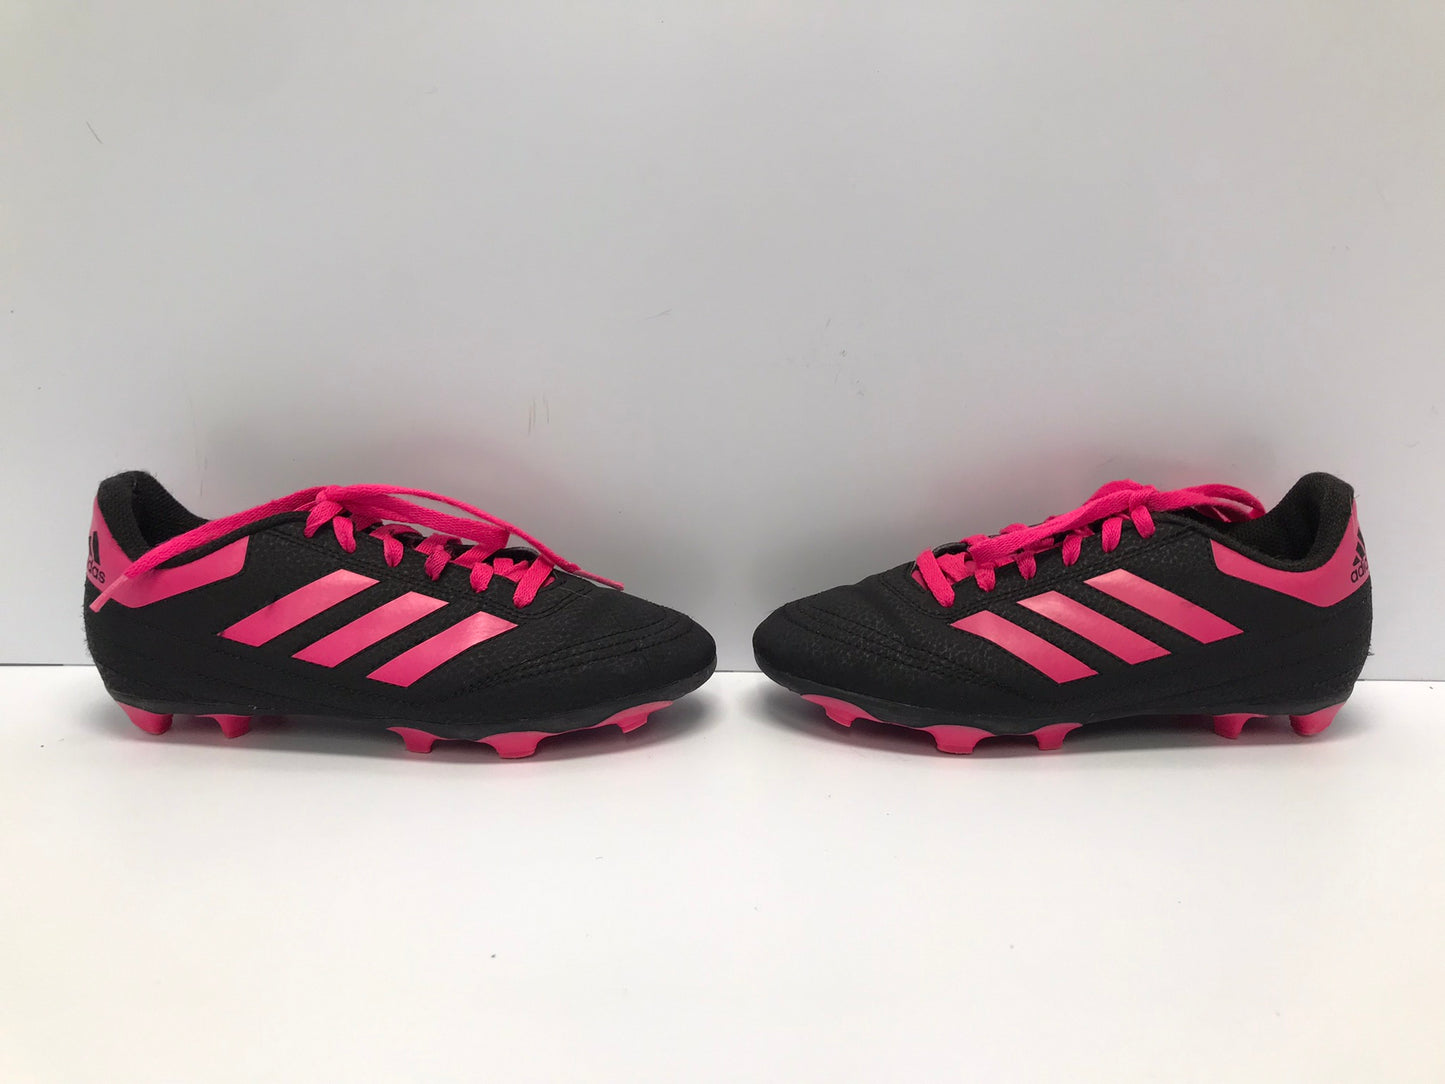 Soccer Shoes Cleats Child Size 2 Adidas Black Pink Excellent